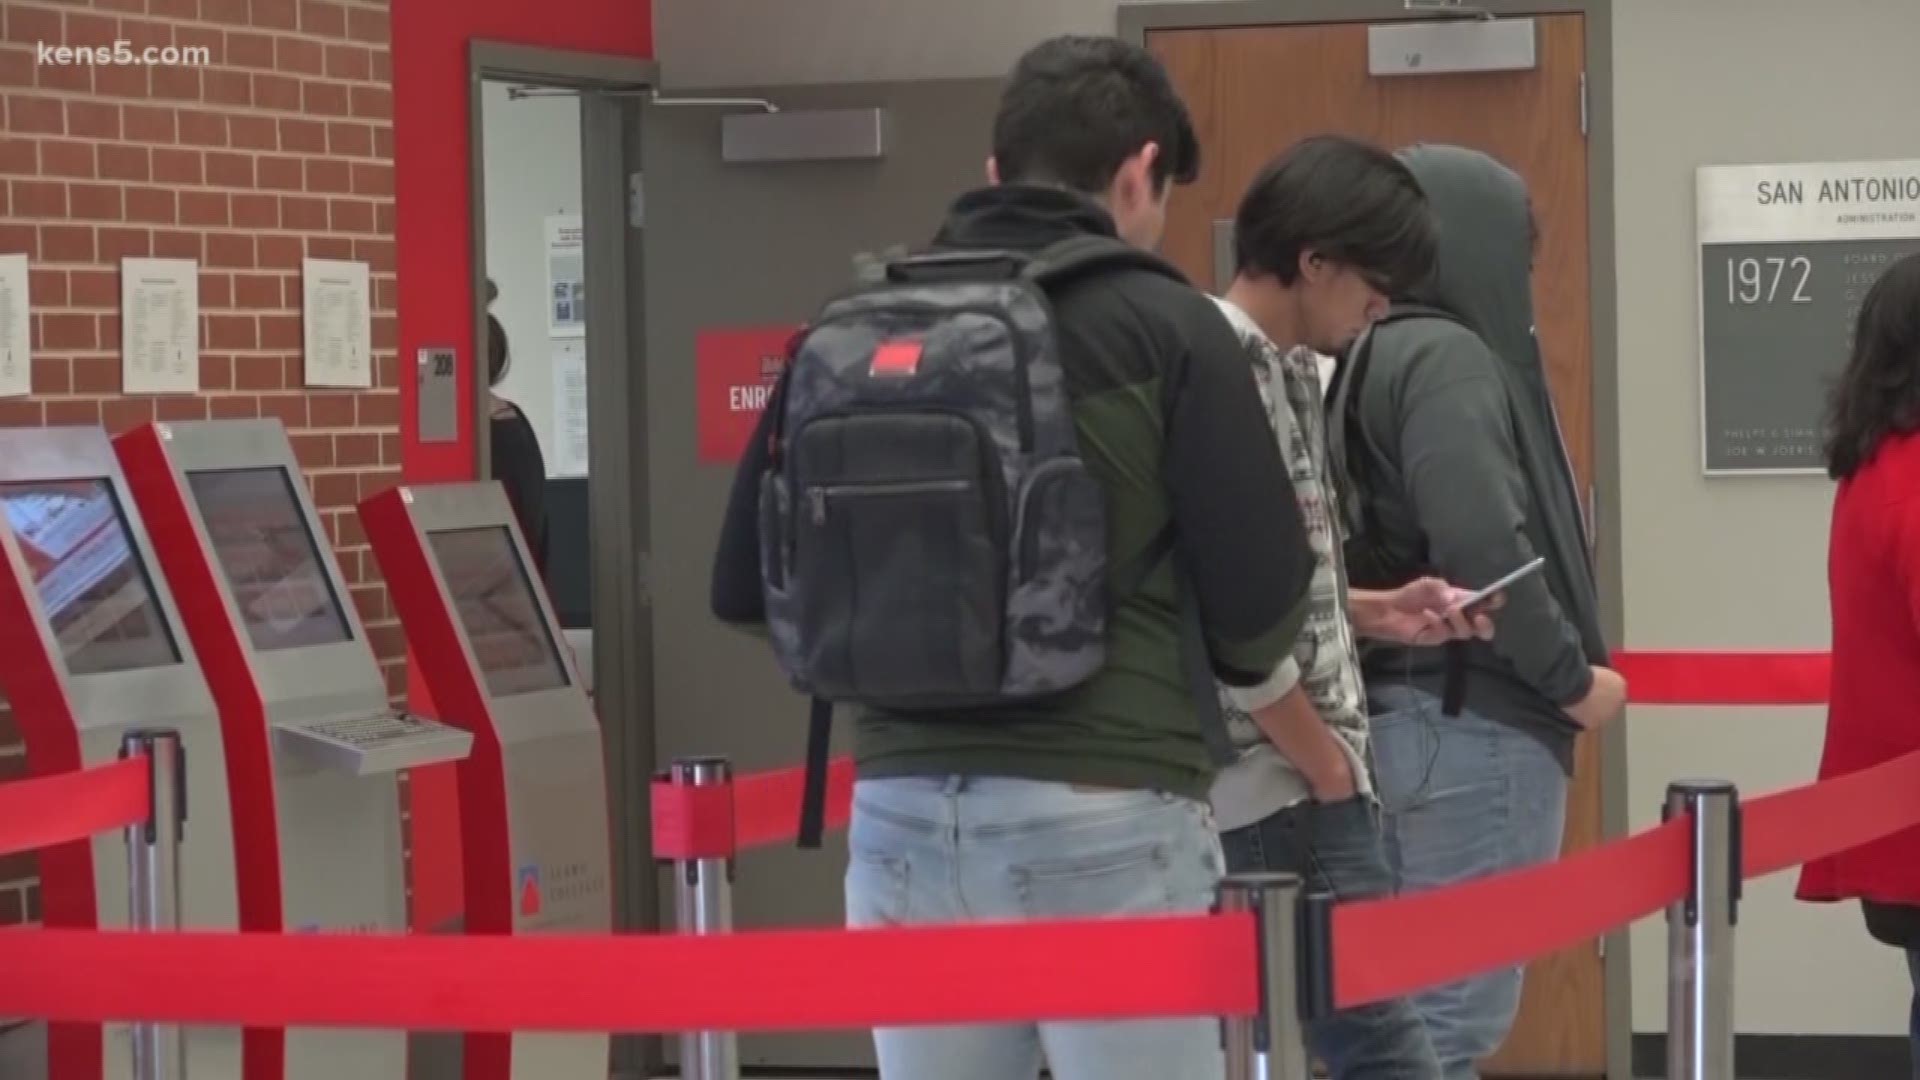 College campuses are feeling the impact from the government shutdown. The deadline for FAFSA submissions at four-year public schools in Texas is tomorrow. But some students are running into issues when filling out their applications for federal assistance. Eyewitness News reporter Savannah Louie is at San Antonio College.